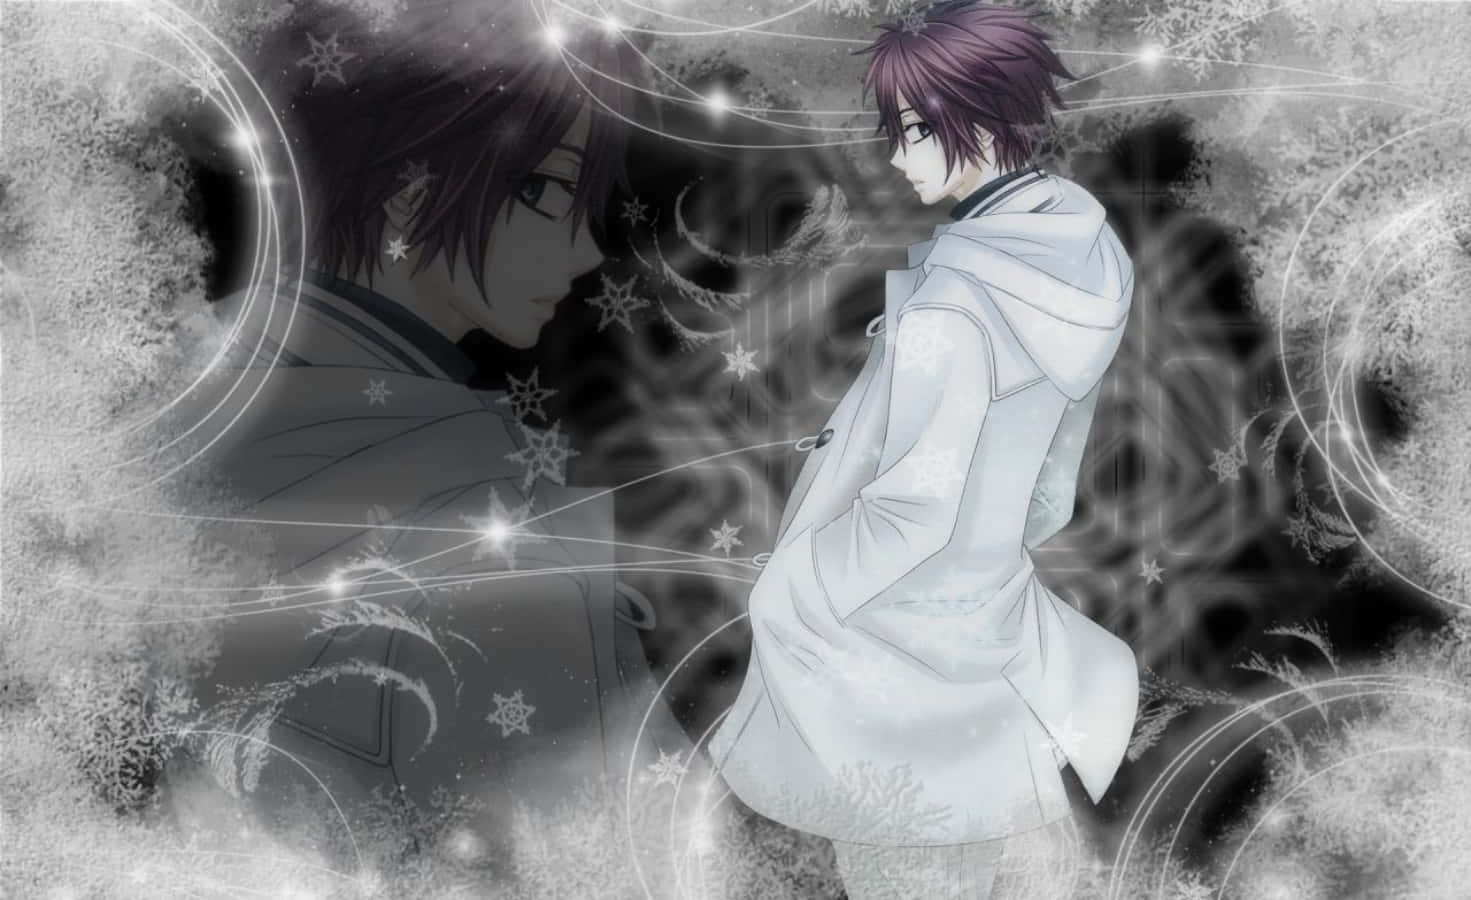 Cool Guy Anime From Vampire Knight Wallpaper